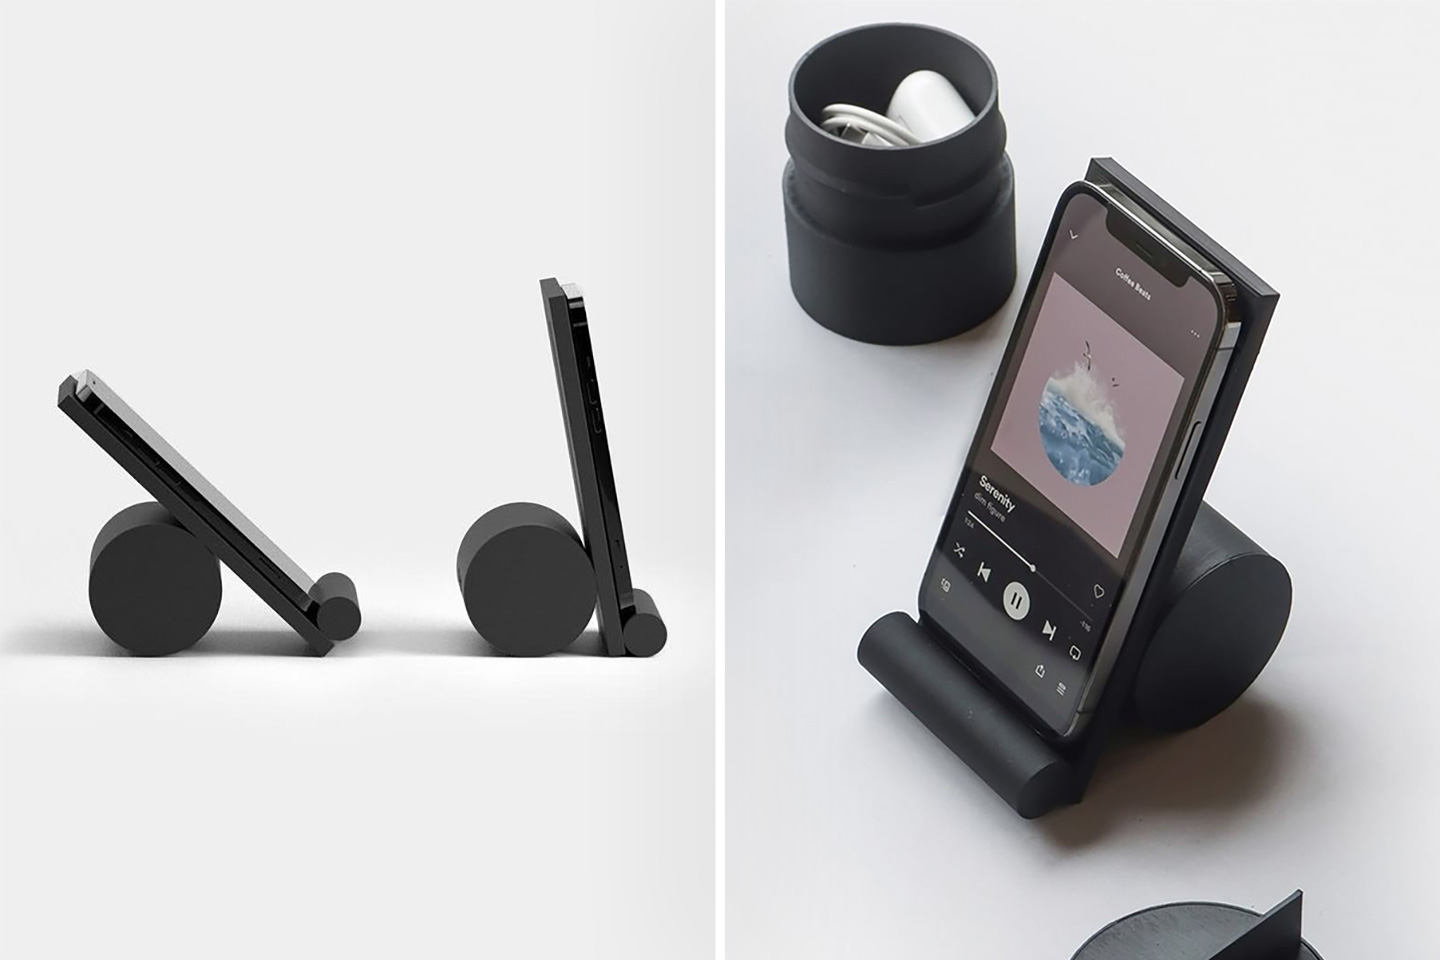 #This adjustable phone stand’s Memphis-inspired design even has space for storing a charging cable